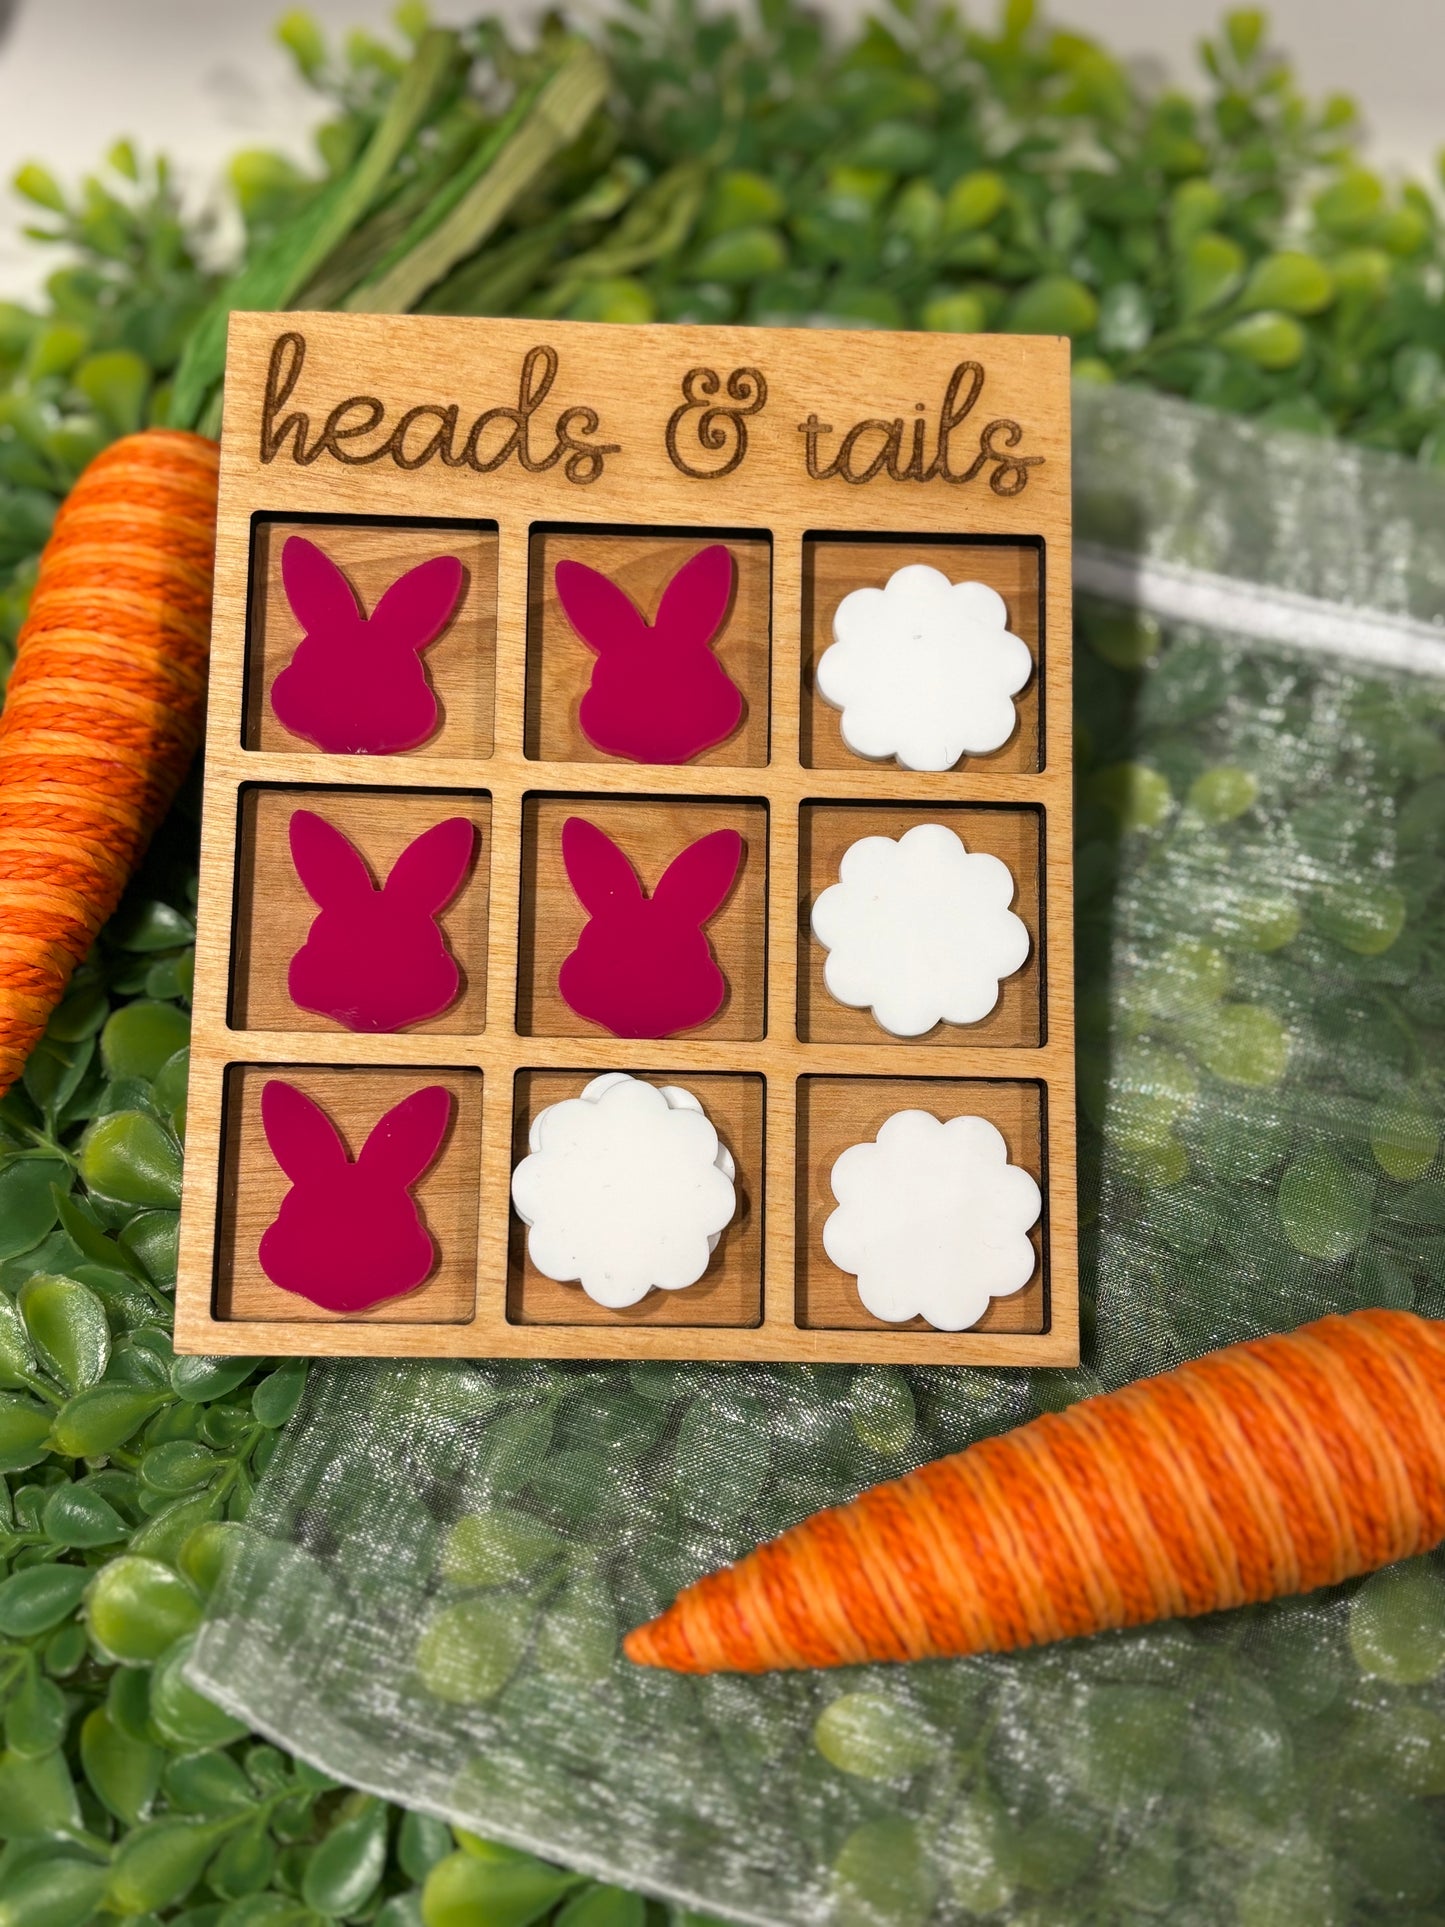 Easter Tic Tac Toe - A Charming Twist on a Classic Game!